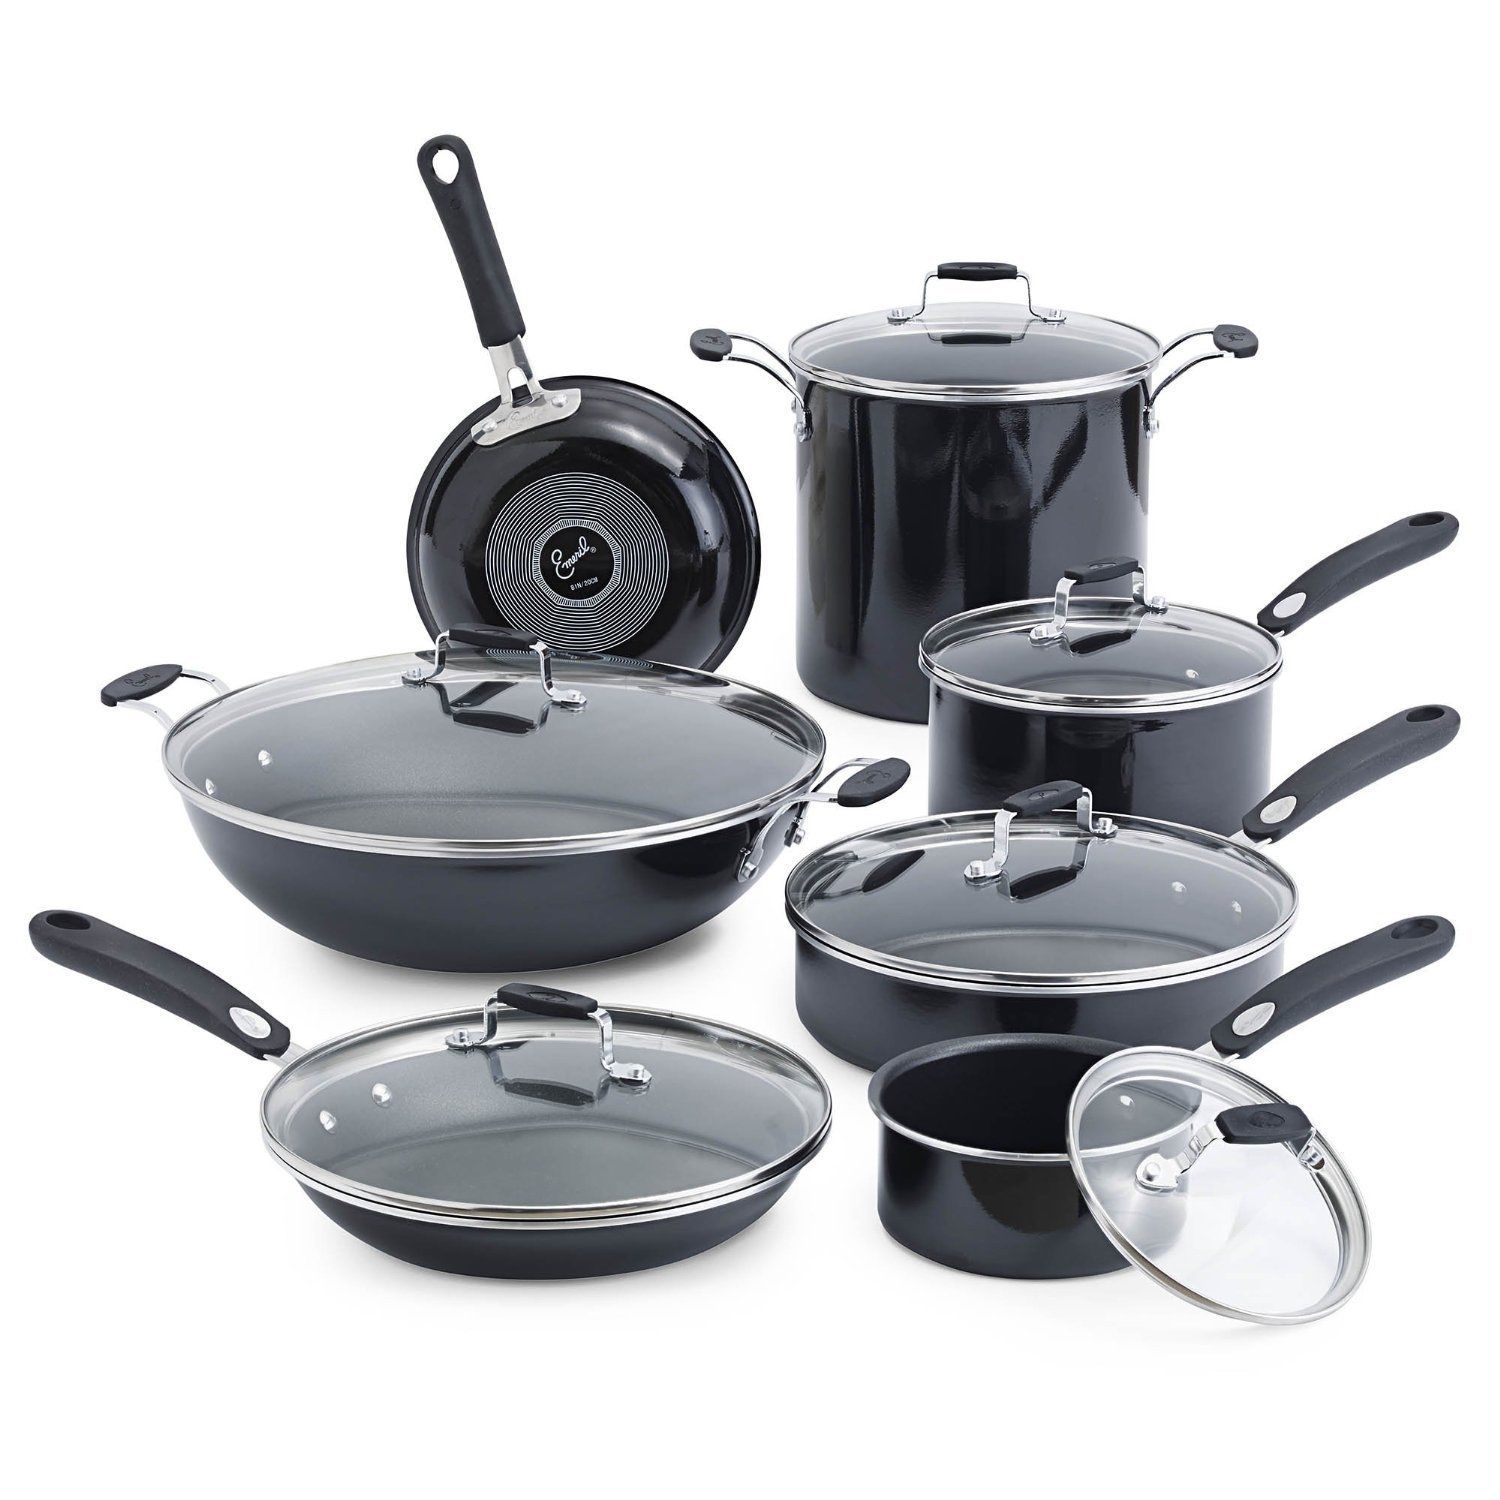 Emeril By All-Clad Hard Enamel Black 13-piece Set, only $109.99, free shipping after using coupon code 